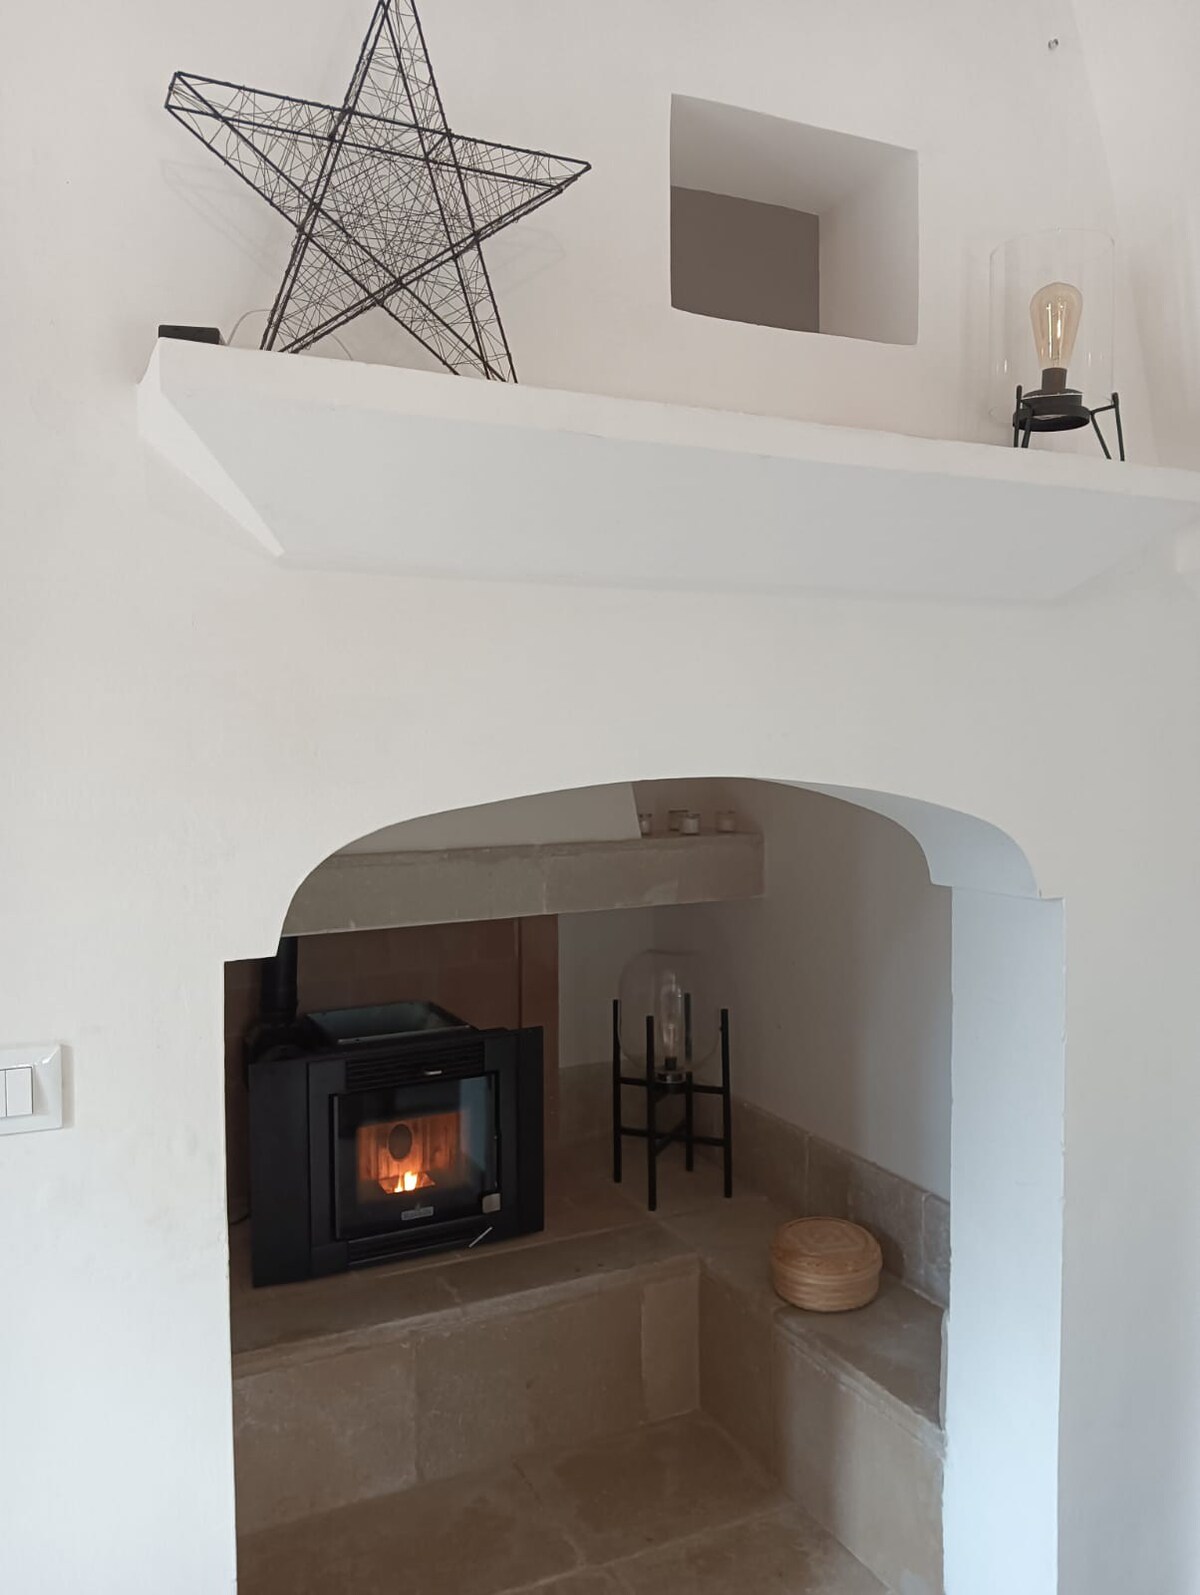 Secret Cottage - Warm even in winter with stove